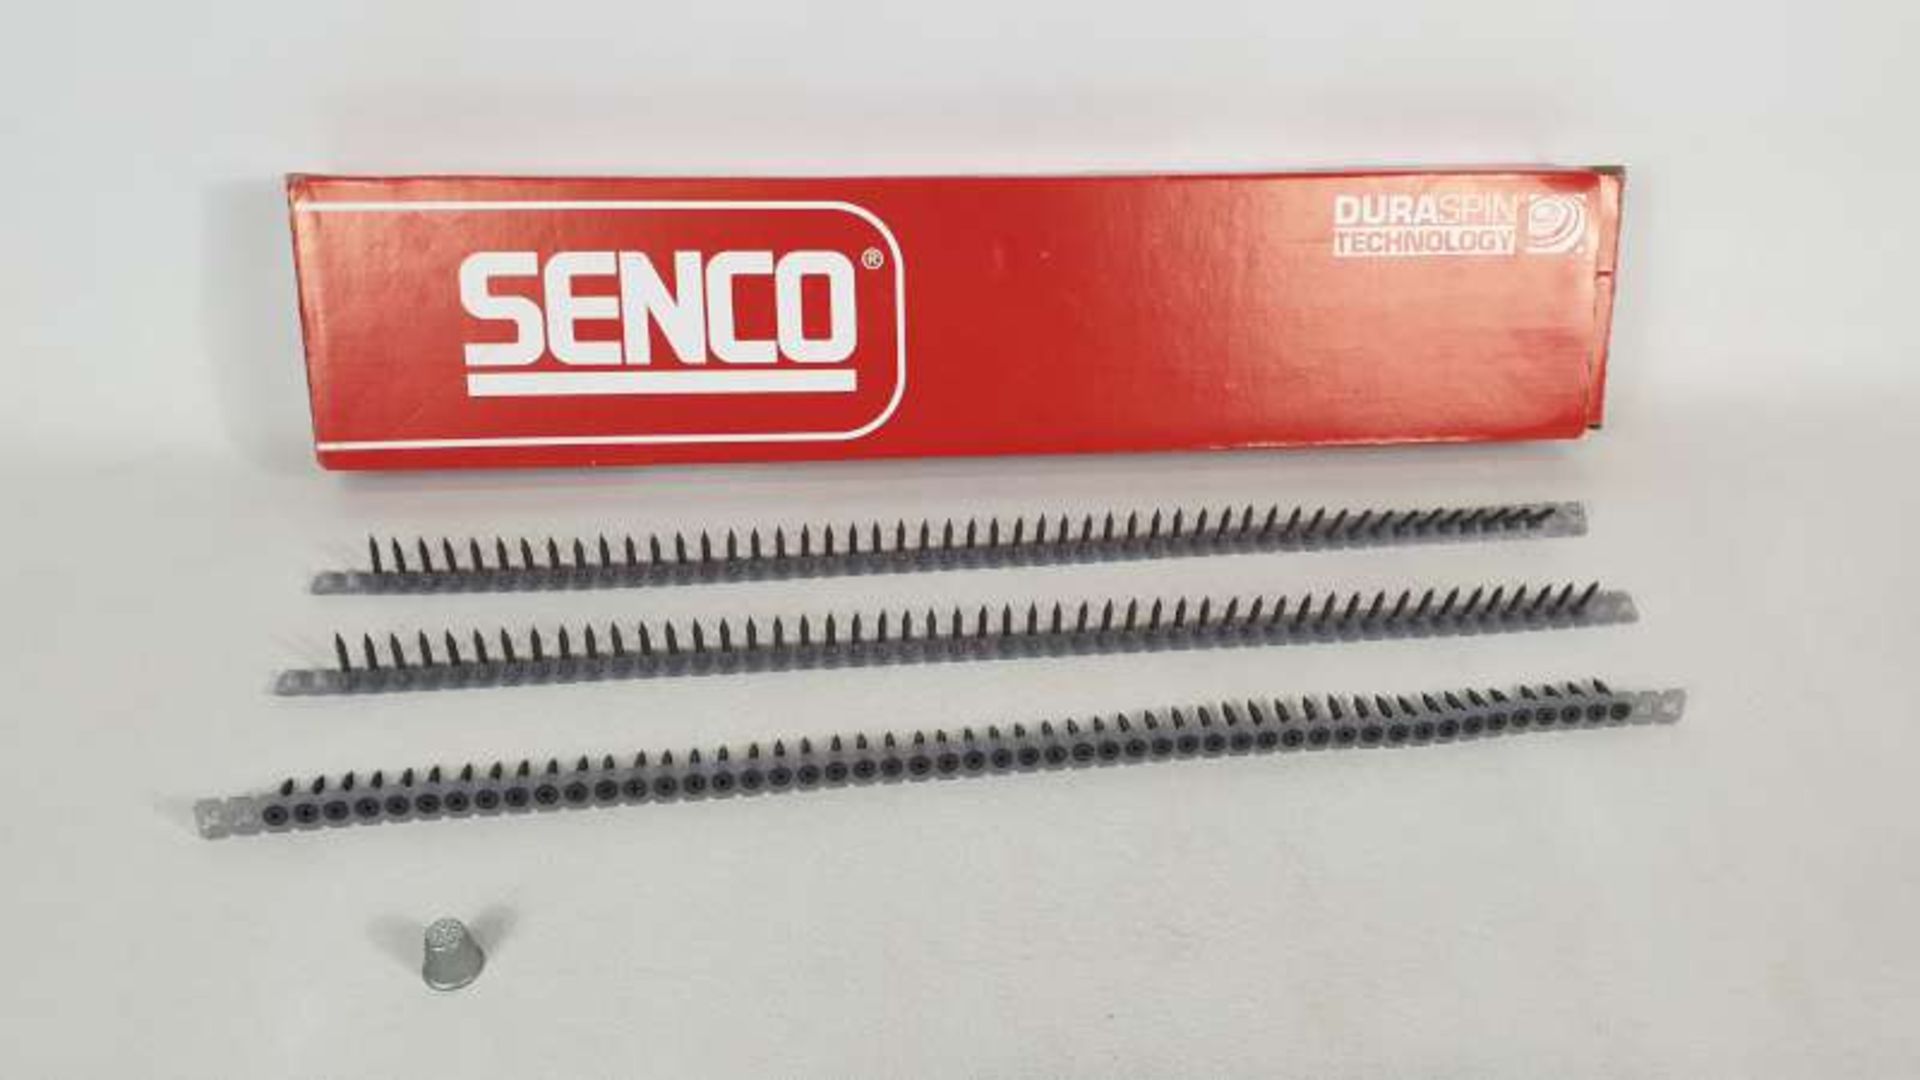 36,000 X SENCO DURA SPIN DRYWALL TO LIGHT STEEL SCREWS SIZE 3.9 MM X 25 MM IN 3 BOXES